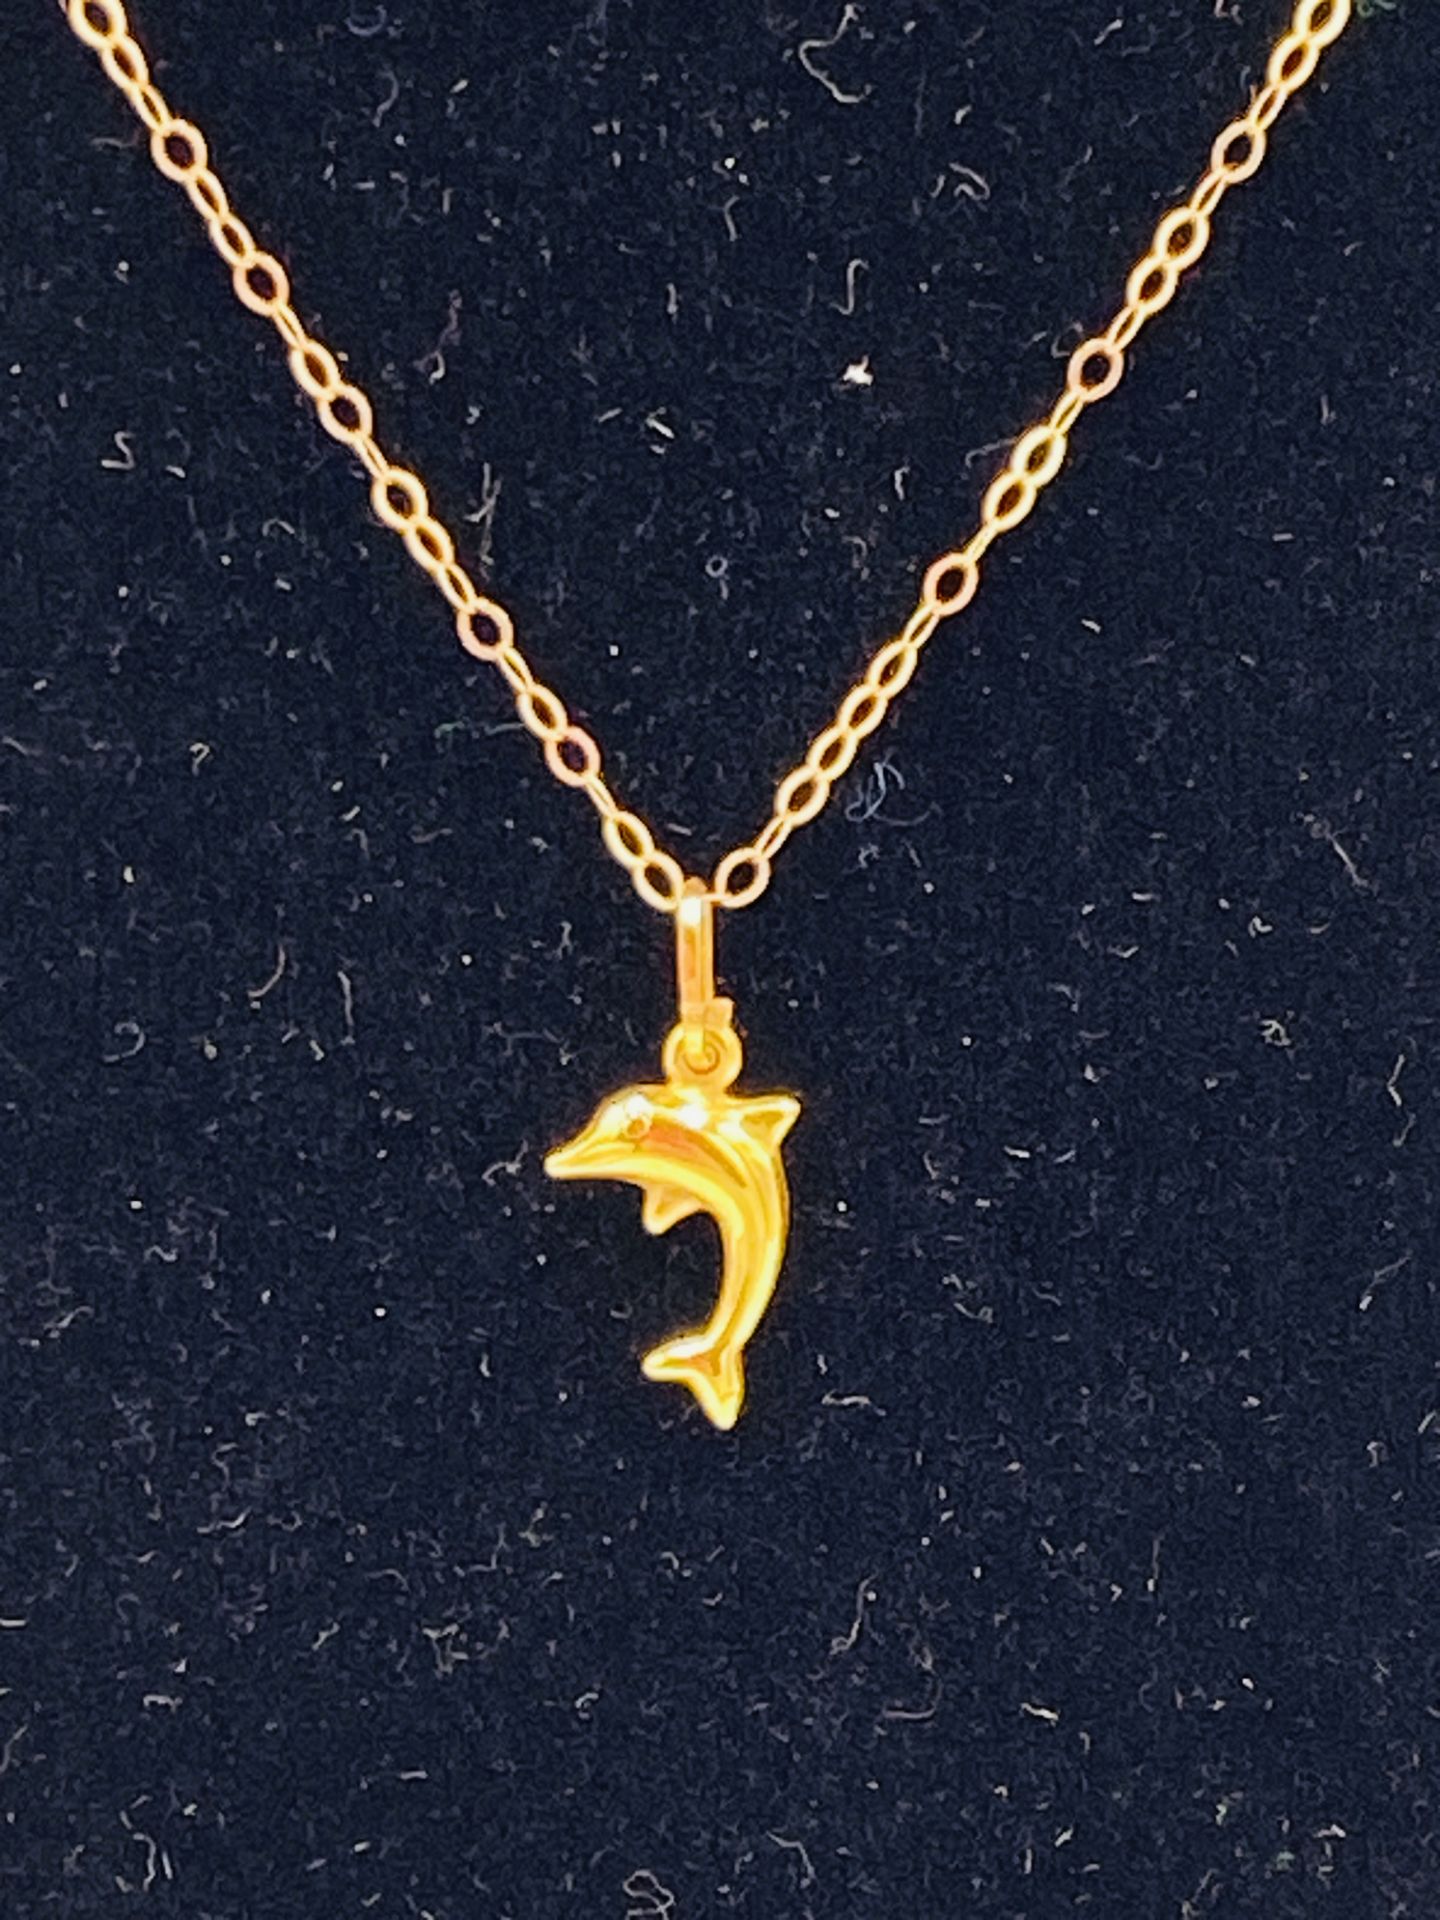 9ct gold necklace with dolphin pendant - Image 3 of 4